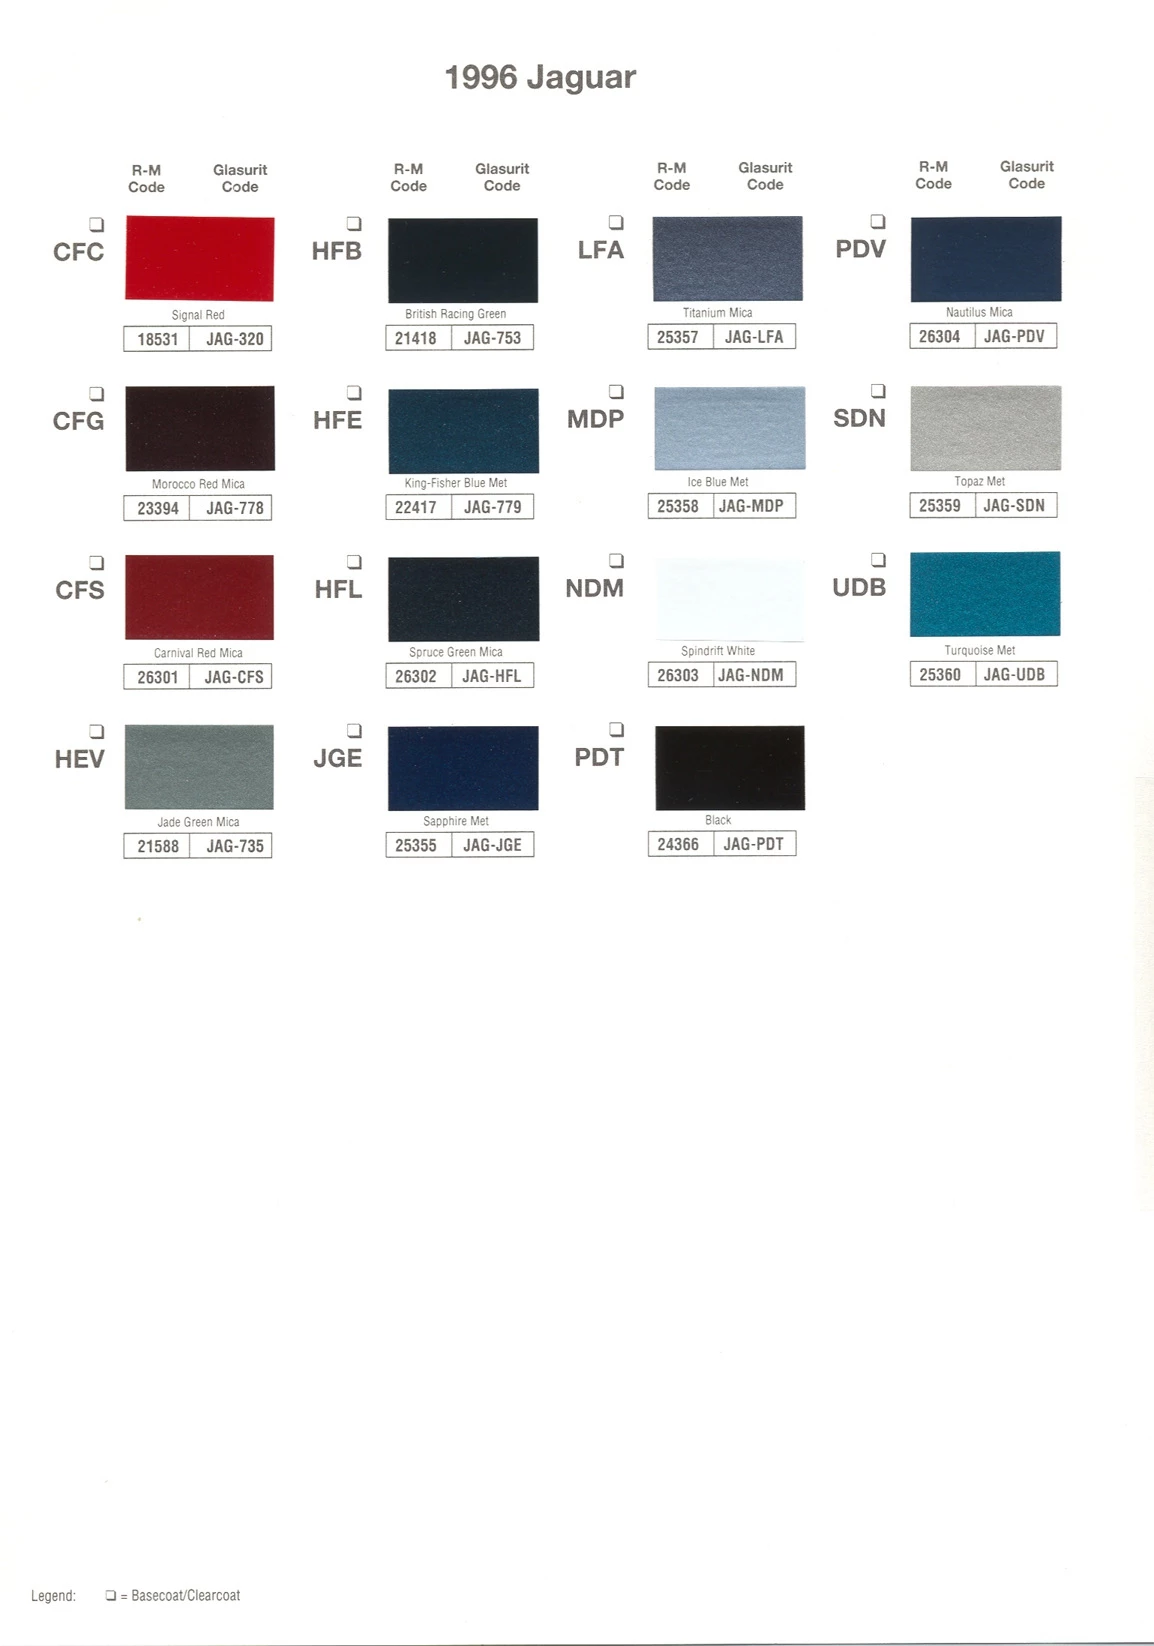 paint swatches and codes used on jaguar vehicles